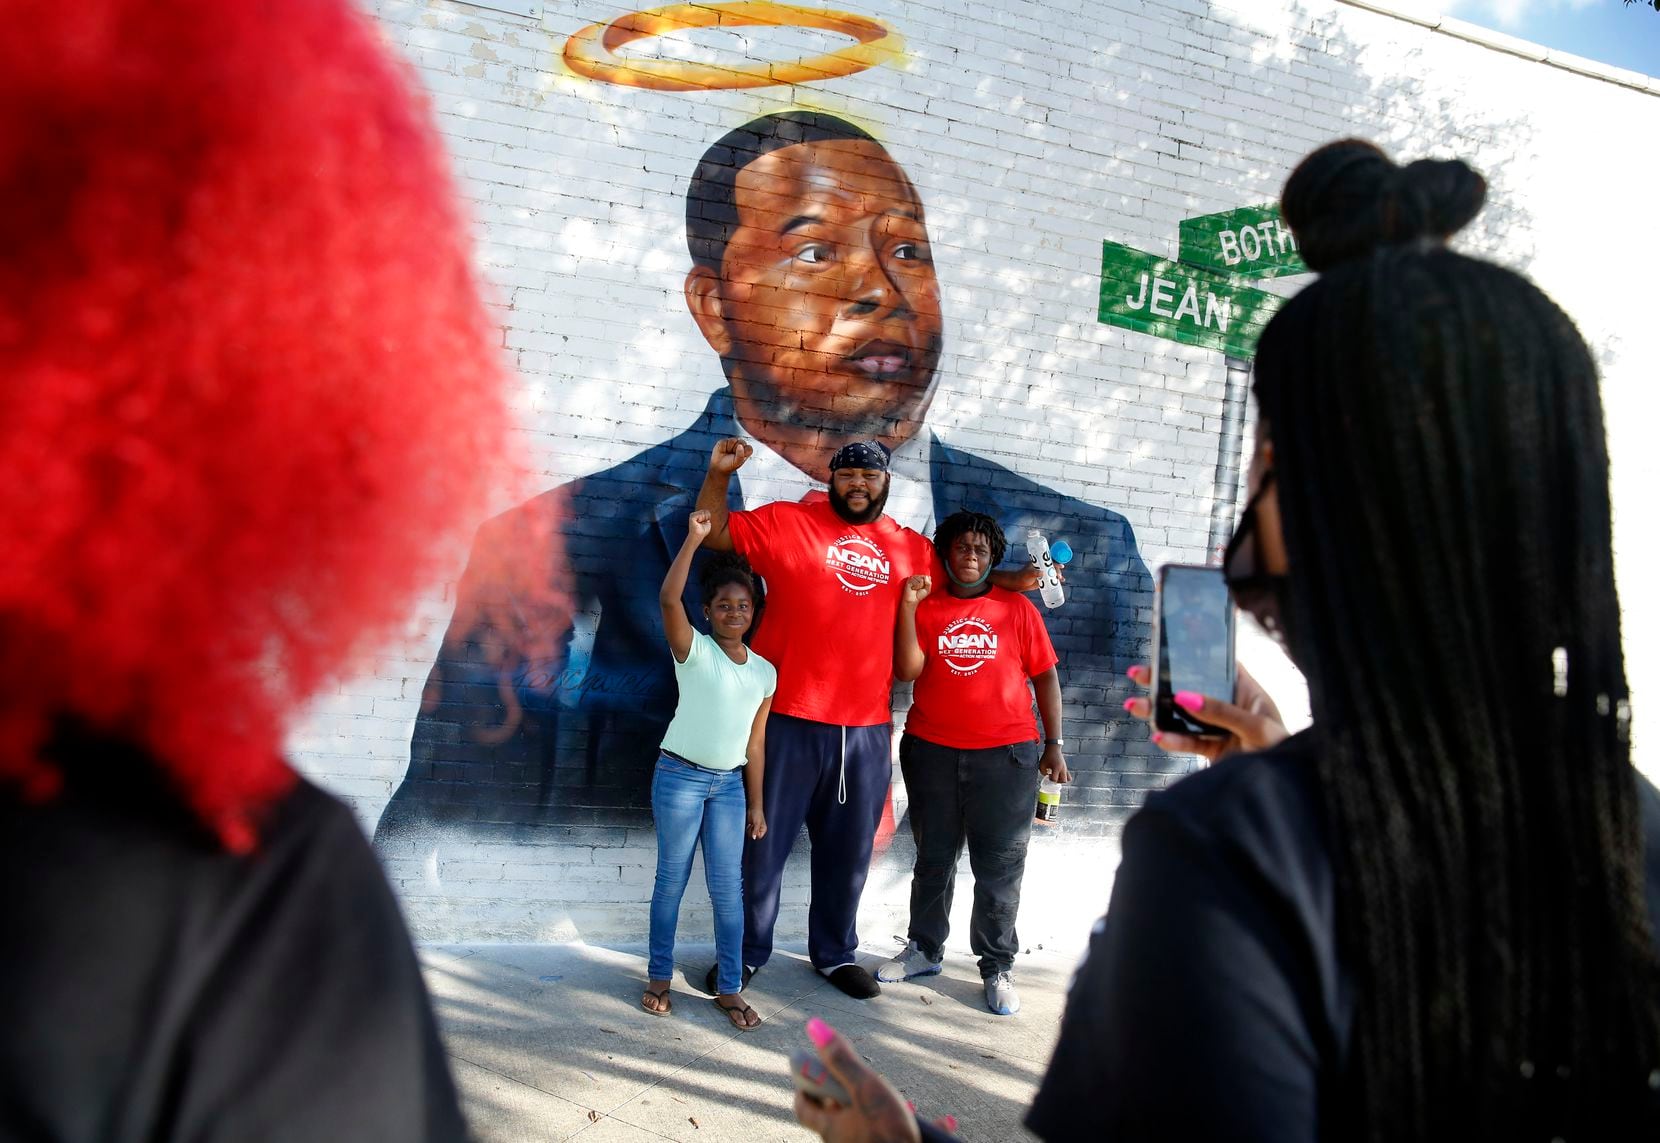 In front of a new painted mural of Botham Jean, Frisco Jackson of Dallas posed for a photo...